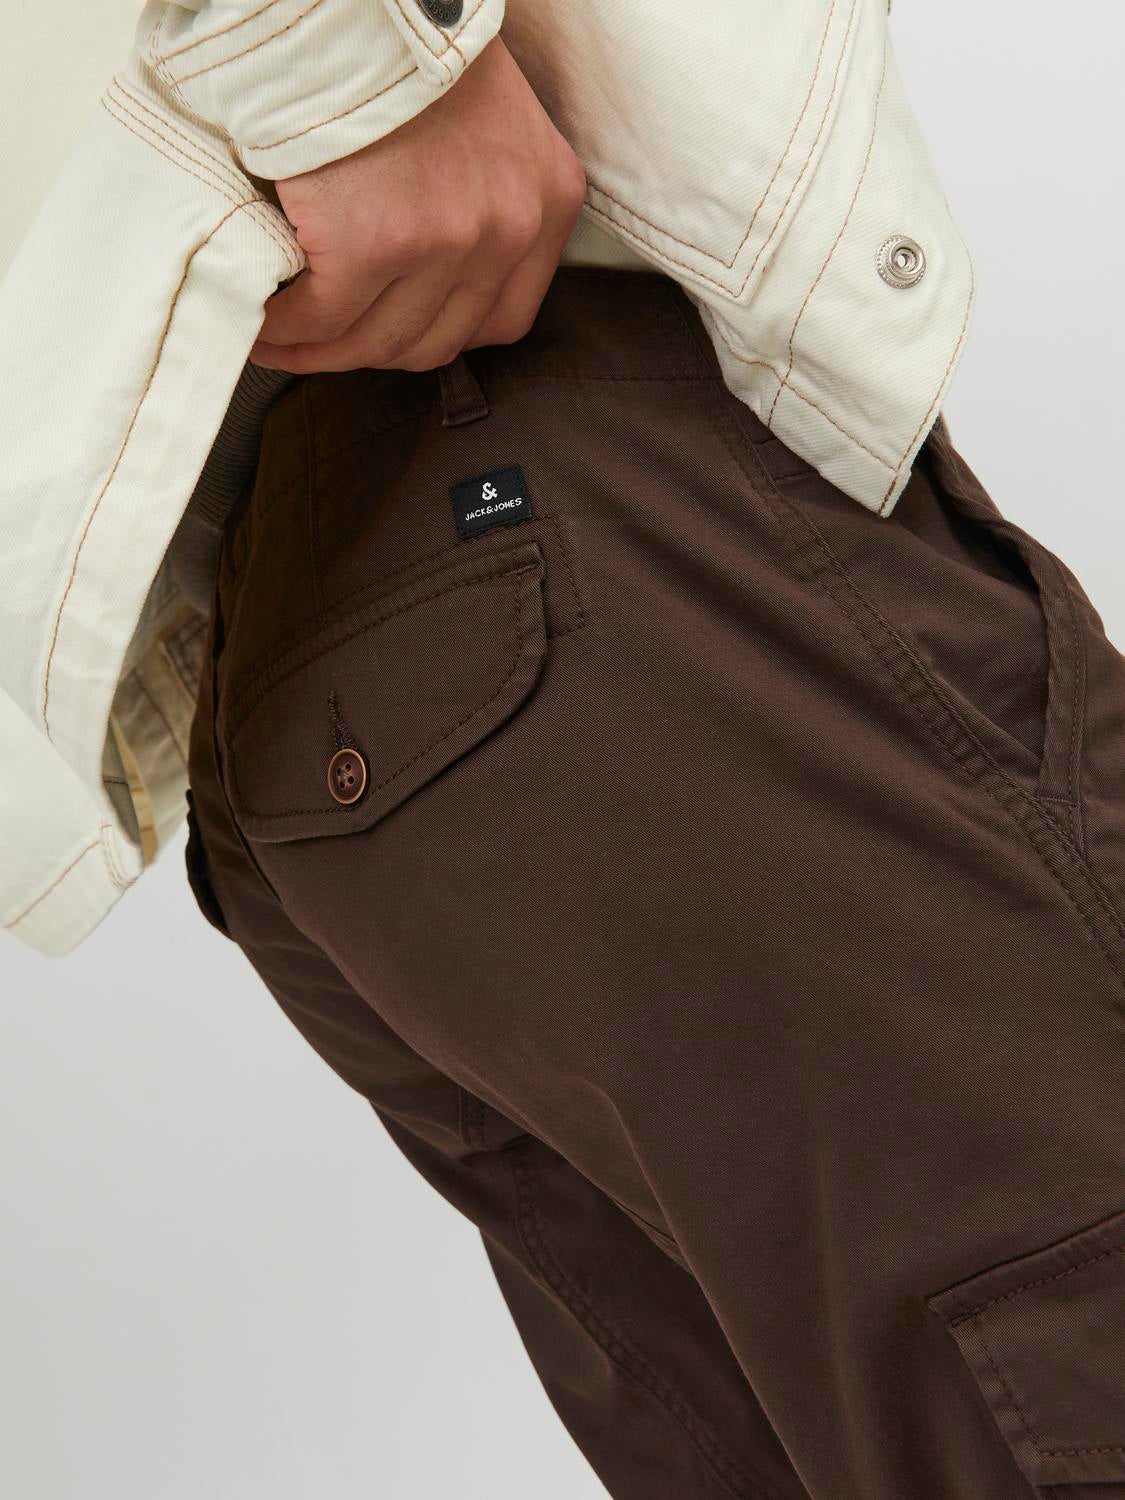 Premium Photo  Model wearing brown color cargo pants or cargo trousers